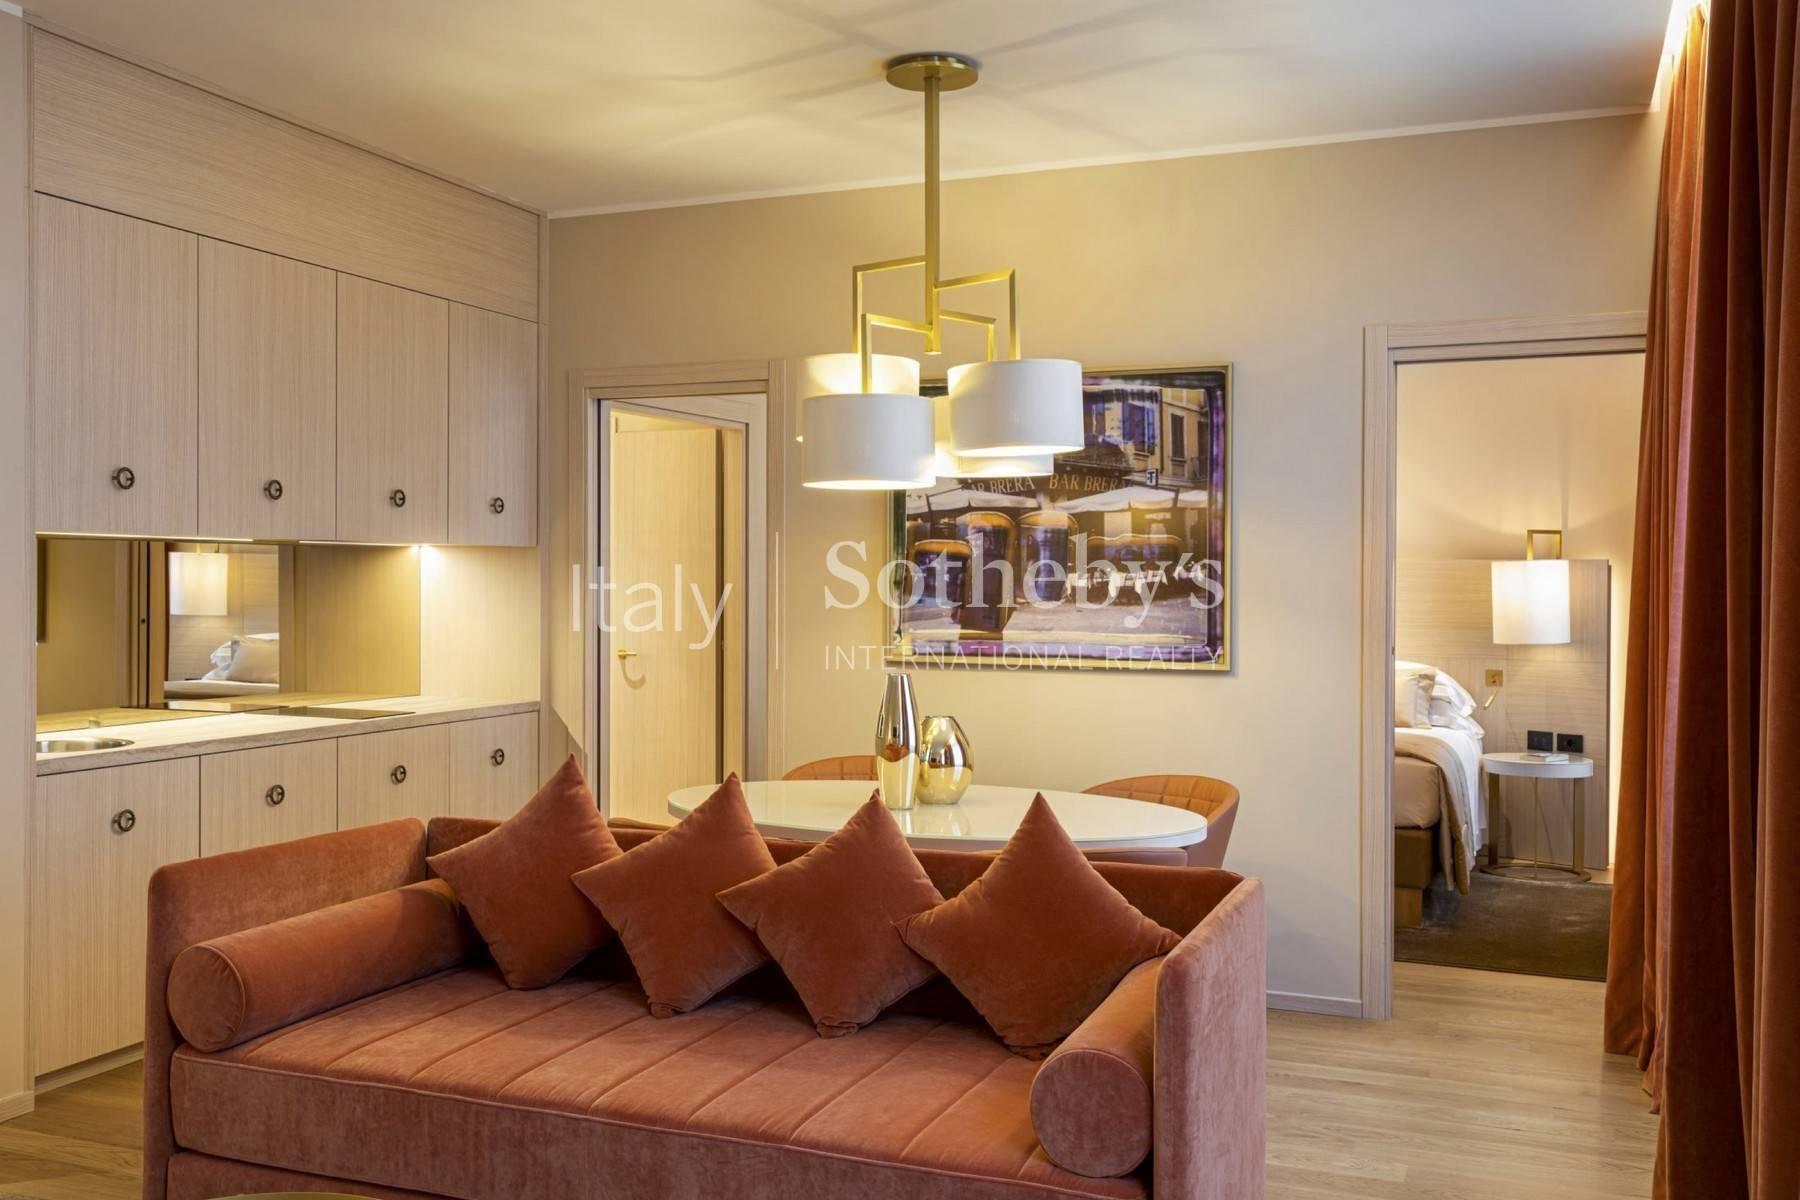 Apartments of various sizes in luxury hotel close to Piazza Duomo - 7